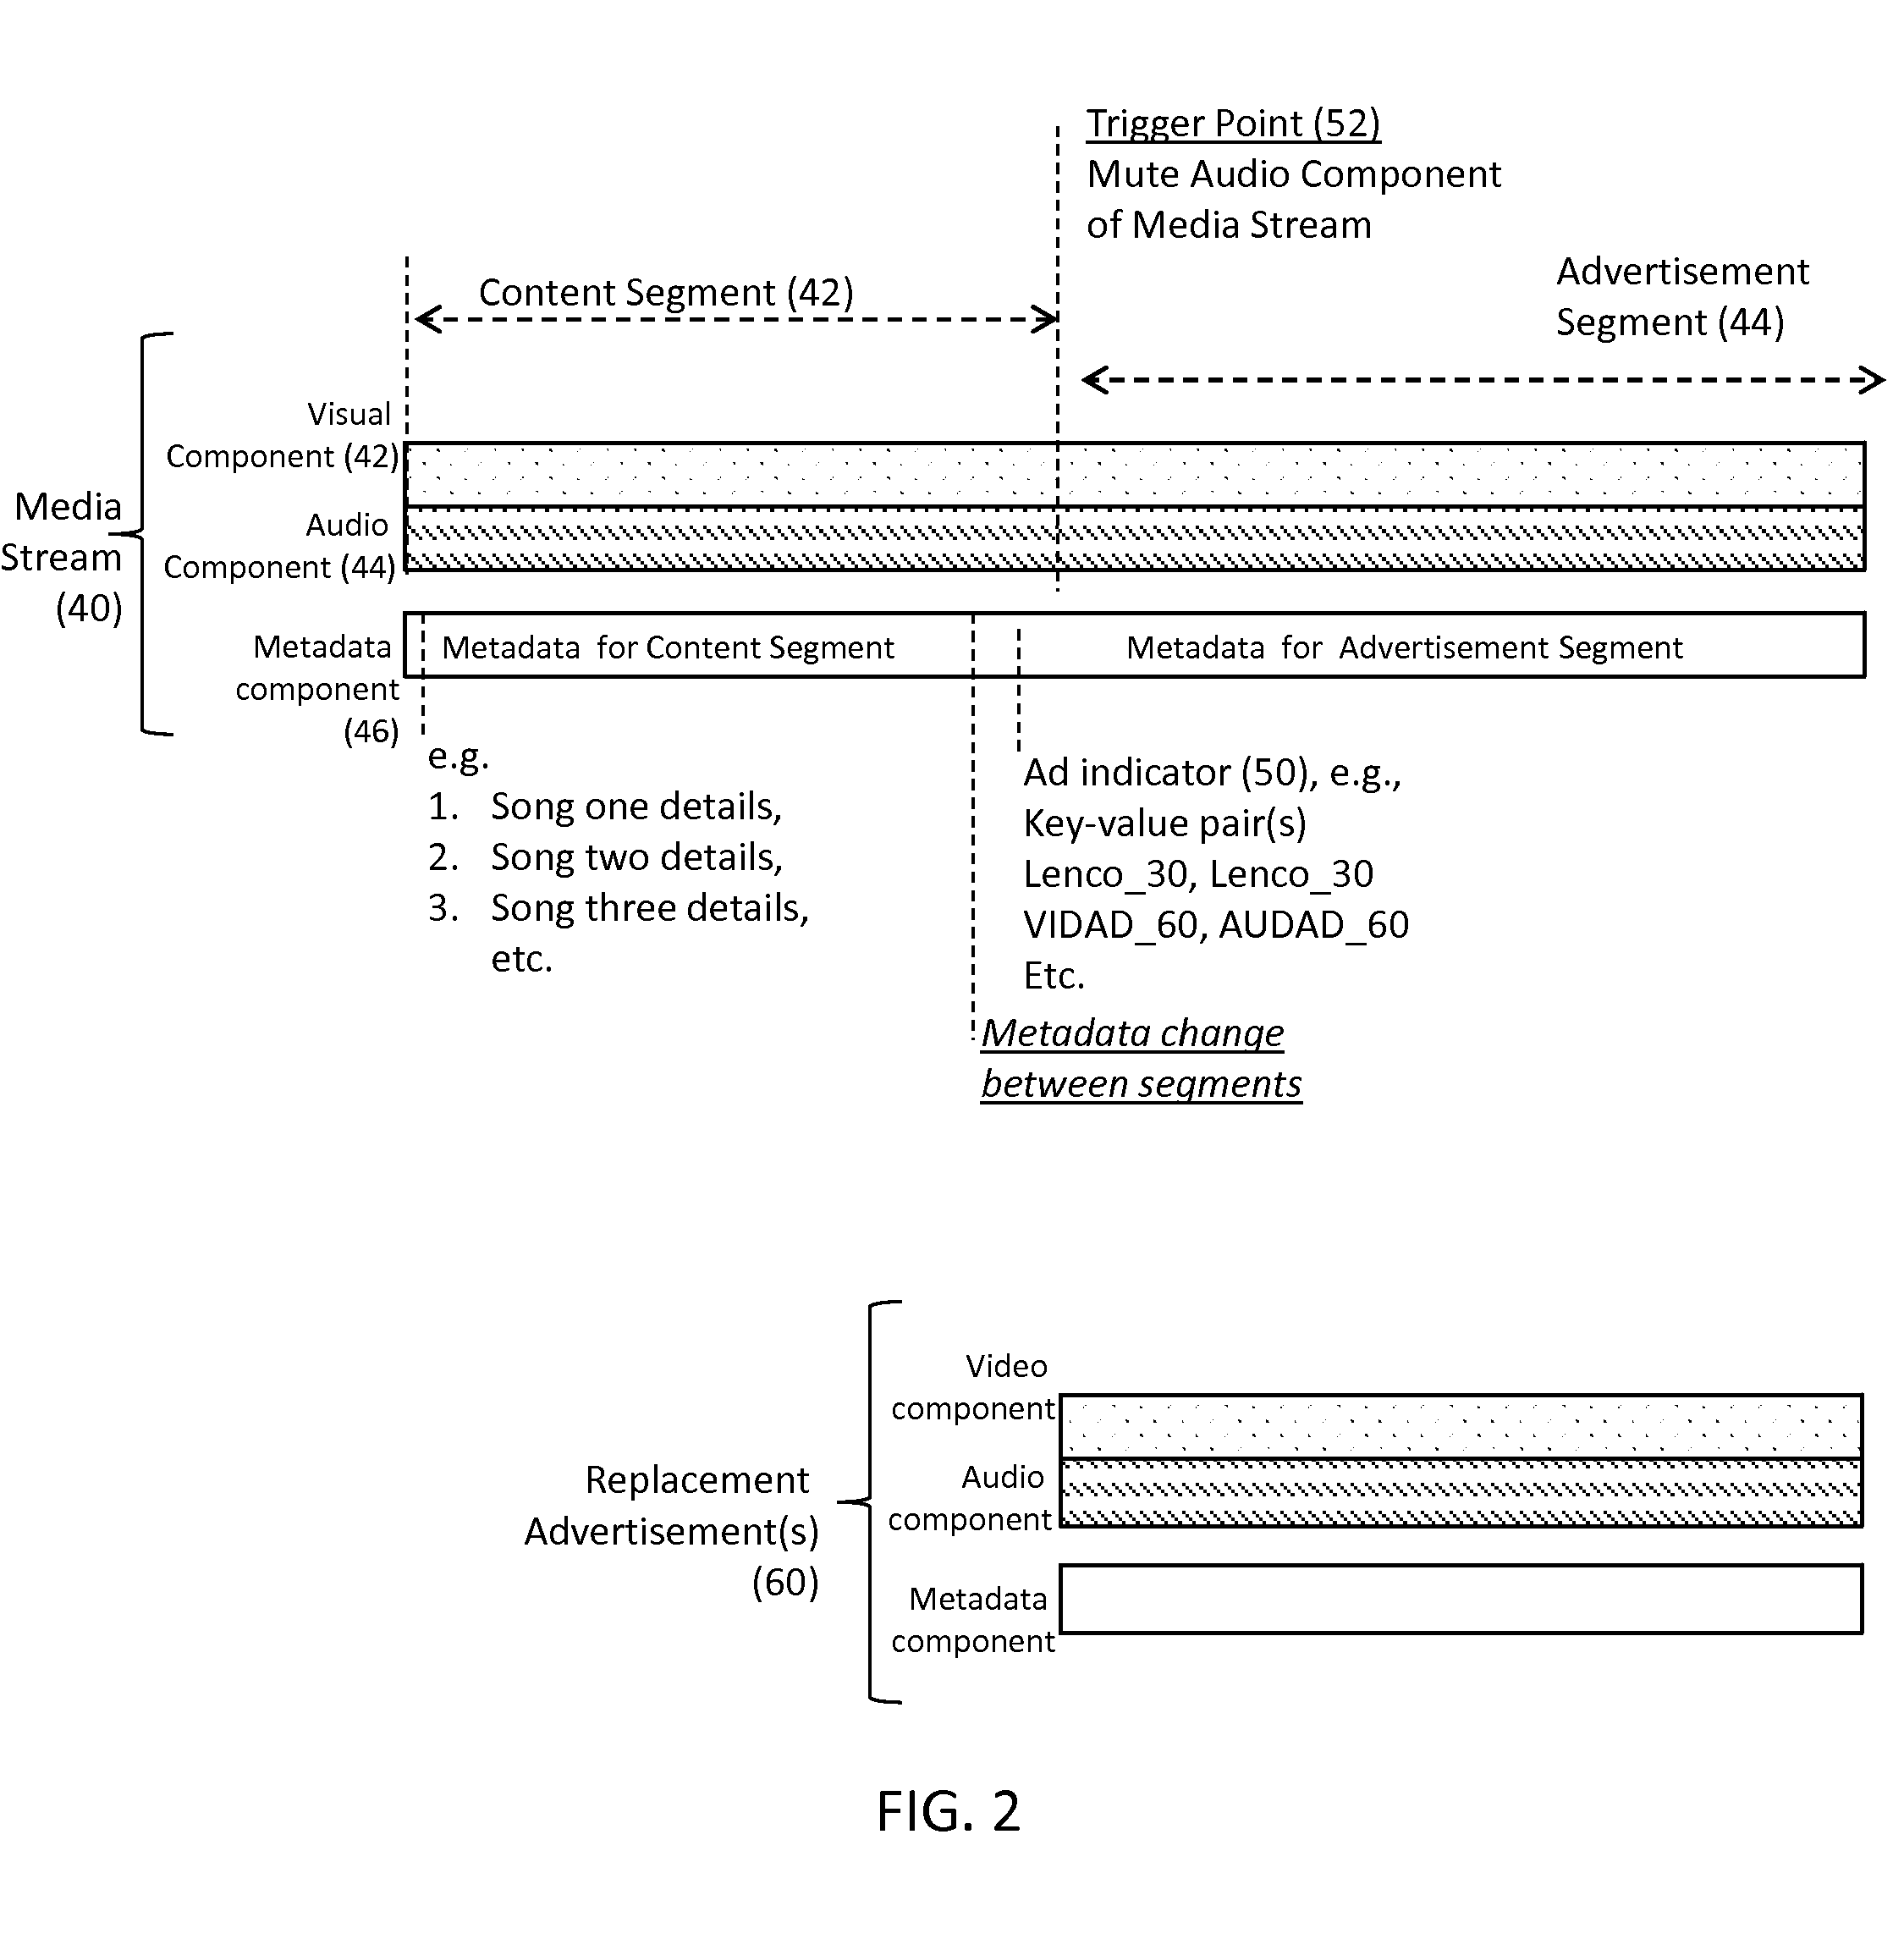 System and method for presenting advertisements in association with media streams